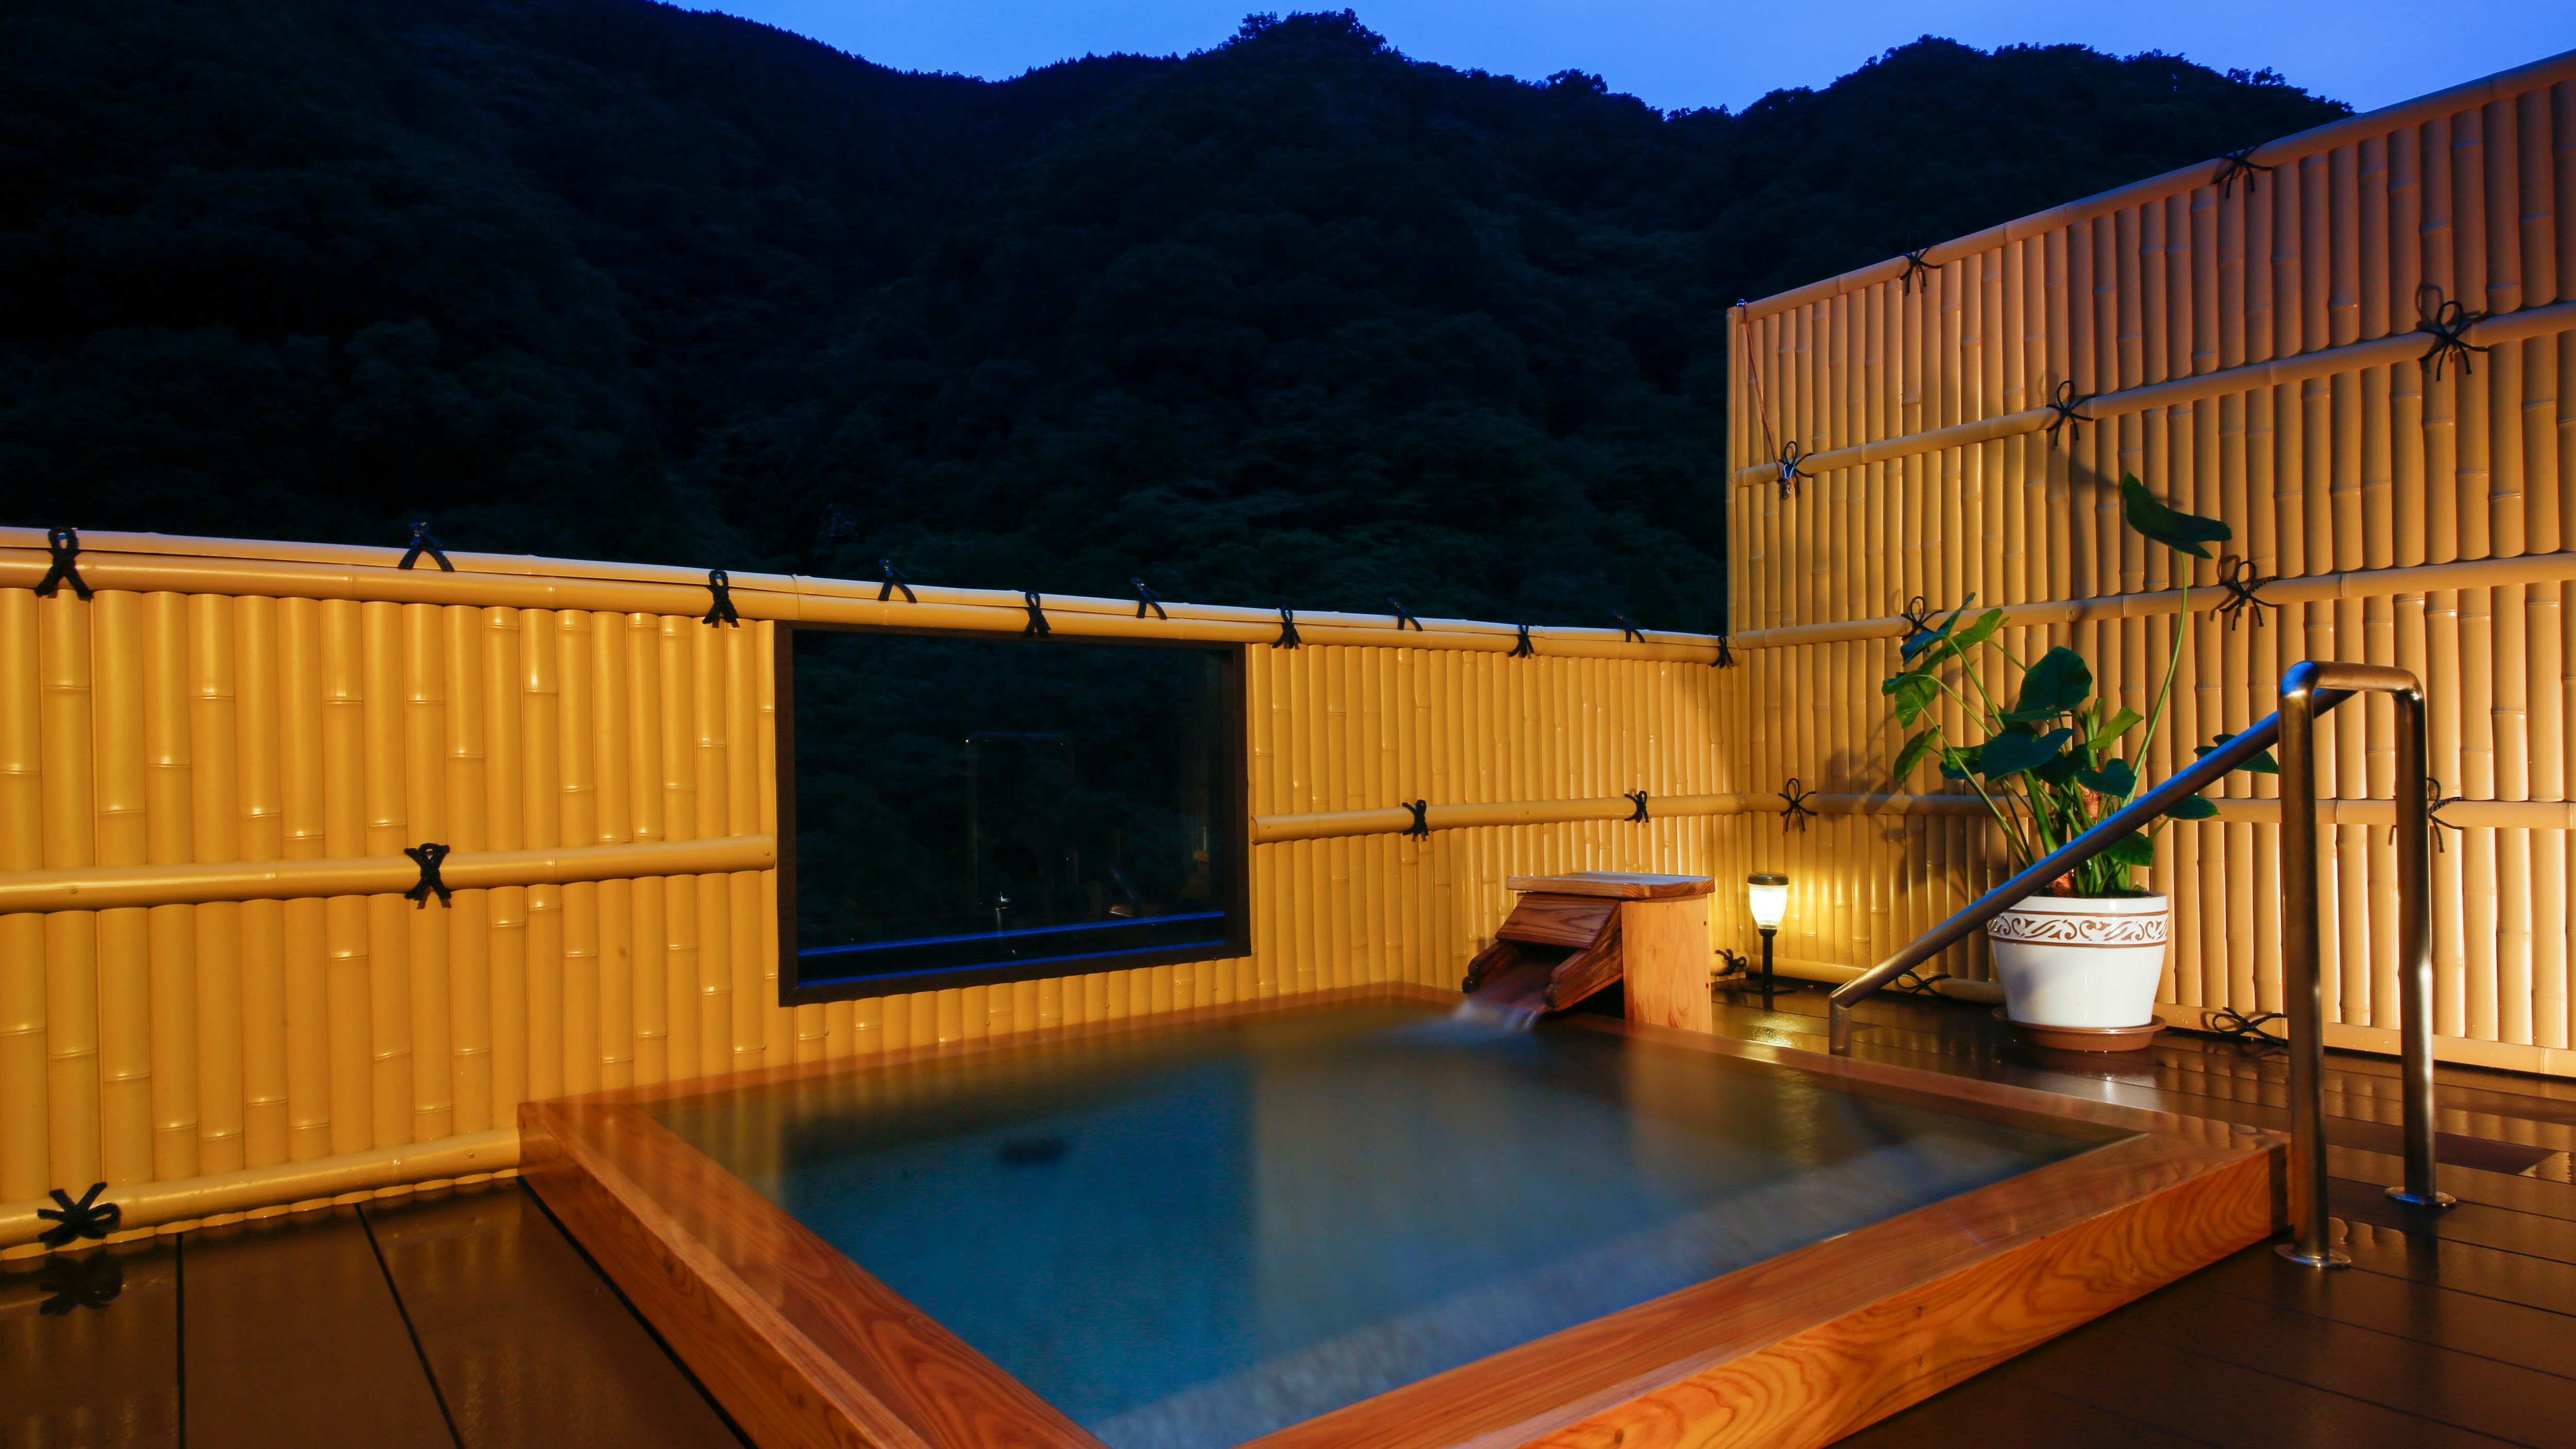 Rooftop private open-air bath